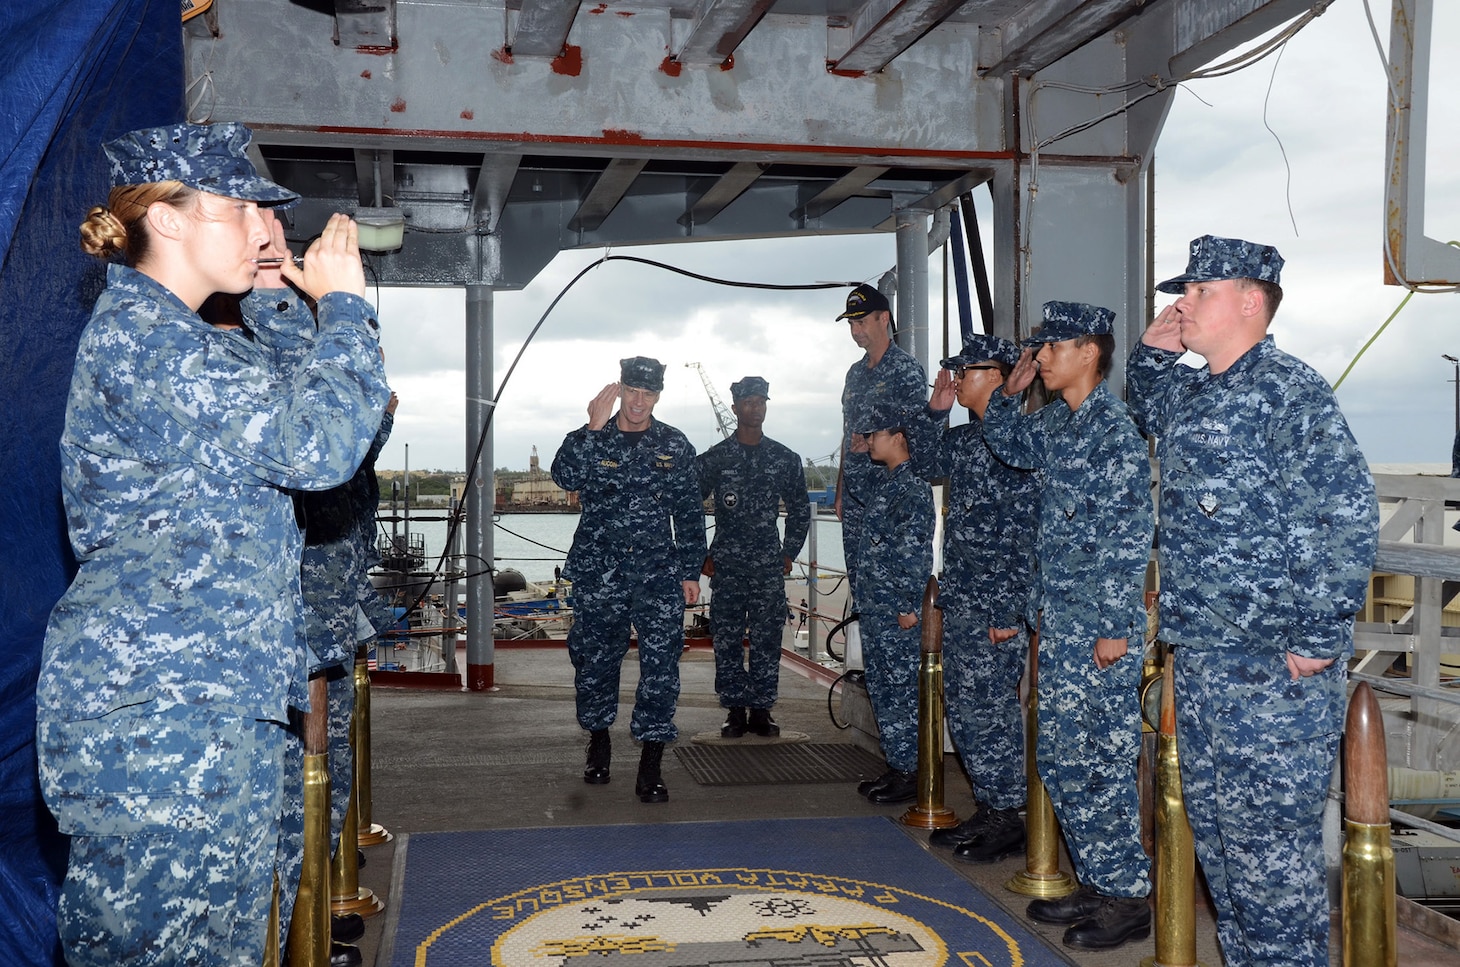 160121-N-YM720-001:
POLARIS POINT, Guam (January 21, 2016) -- Vice Adm. Joseph Aucoin, center, commander, U.S. 7th Fleet, returns a salute as he walks through the side boys as he comes aboard the Submarine Tender USS Frank Cable (AS 40), Jan. 21.  Aucoin visited Frank Cable to see first hand the repair capabilities the ship offers to units in the 7th Fleet.  During the tour of the ship, Aucoin met with Frank Cable Sailors who demonstrated their shop's repair capabilities that are offered to submarines and surface ships.  Frank Cable, forward deployed to the island of Guam, conducts maintenance and support of submarines and surface vessels deployed to the U.S. 7th Fleet area of responsibility.

(U.S. Navy photo by Mass Communication Specialist 3rd Class Allen Michael McNair/Released)
